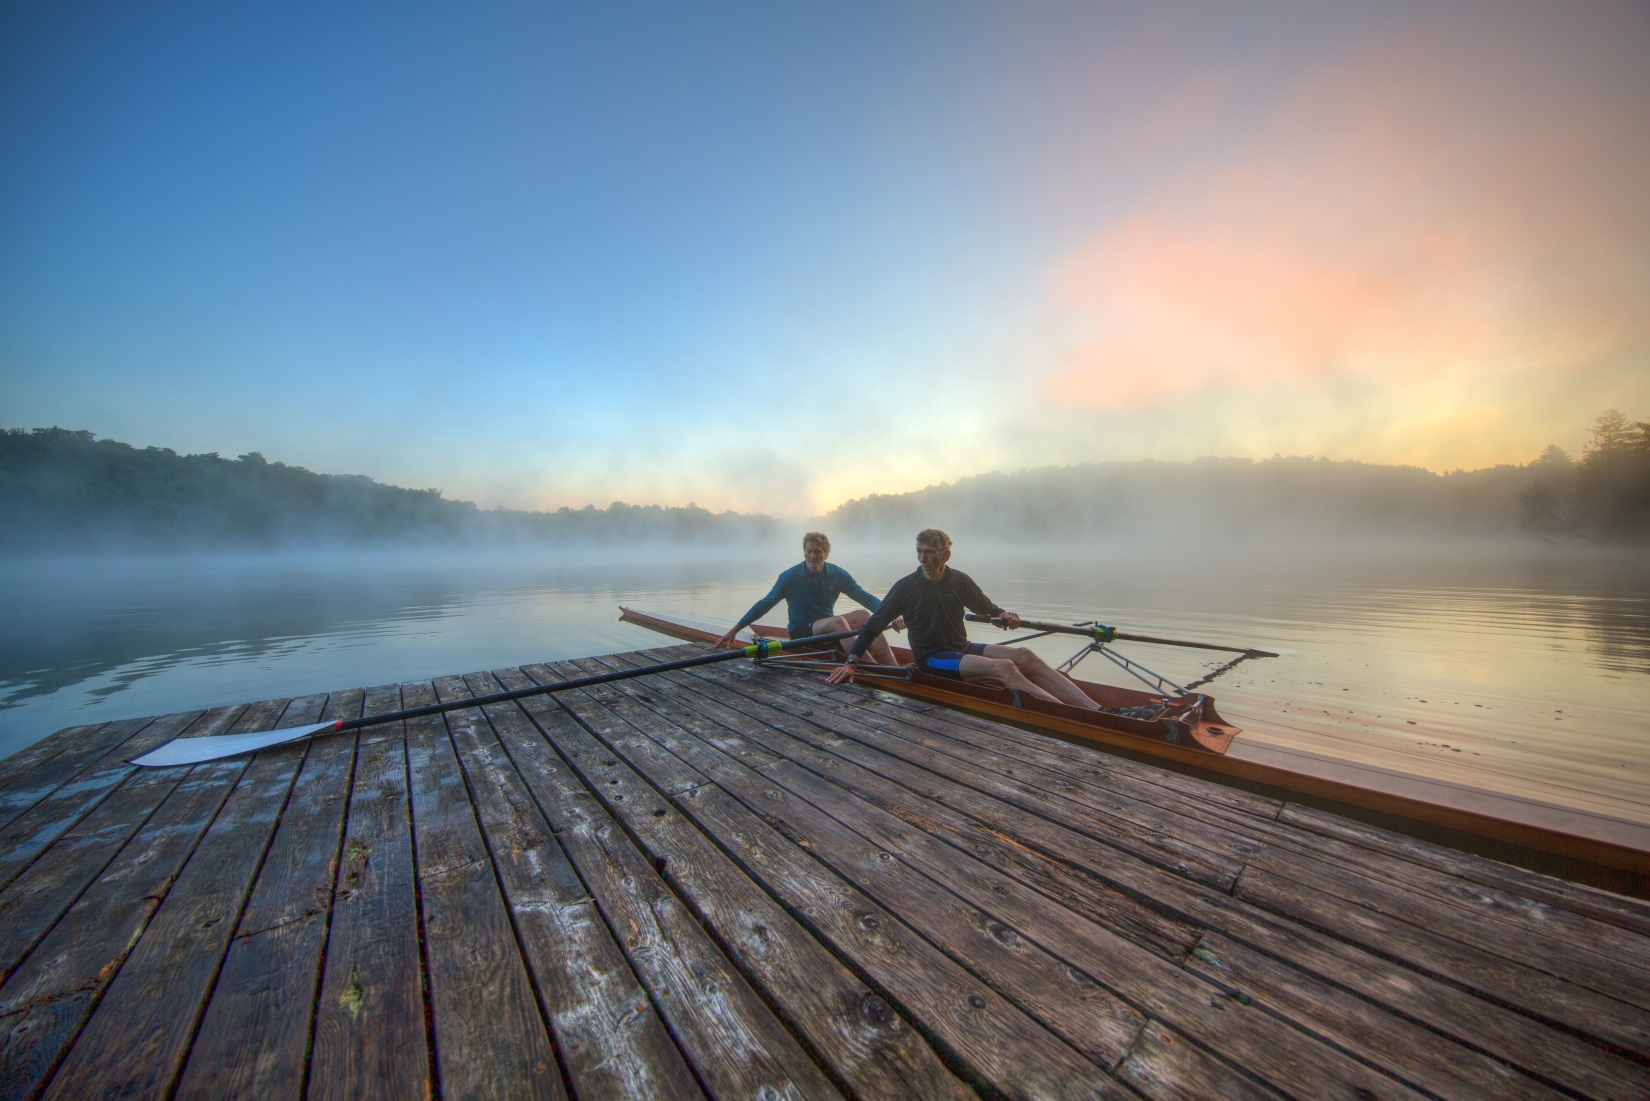 Founders Dick and Peter continue to innovate and personally test each product. Here they are heading out for an early morning oar-testing session in their 1984 wooden Stämpfli pair on Big Hosmer Pond, Craftsbury, Vermont.